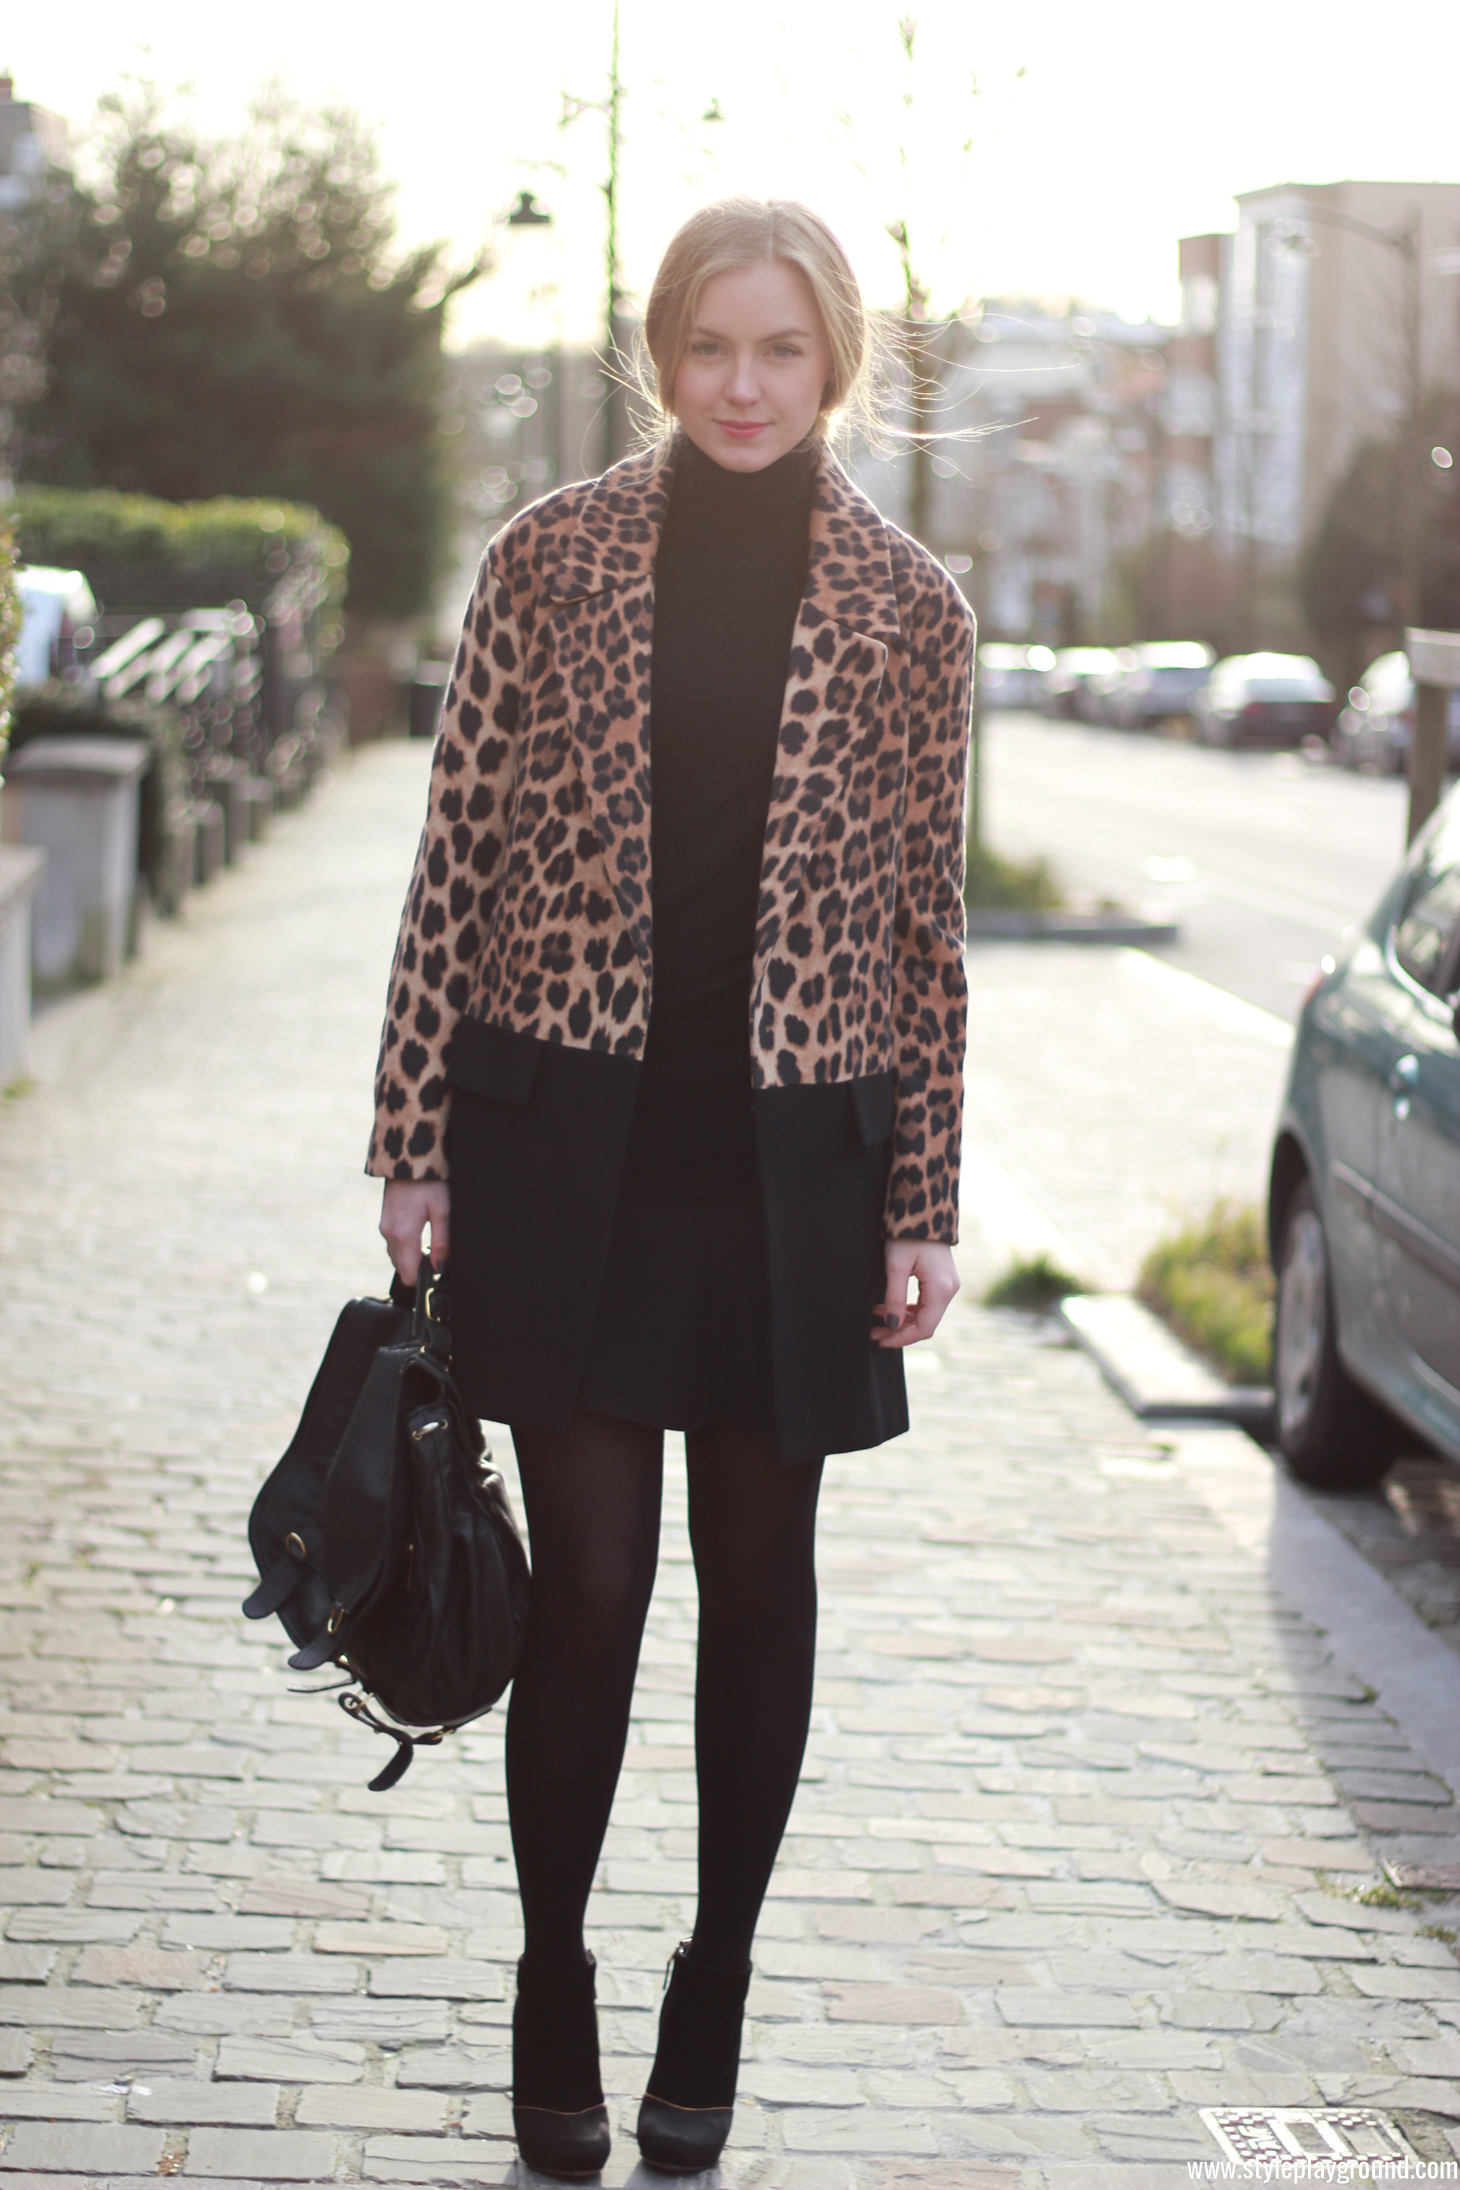 My biggest obsession /// www.styleplayground.com /// Axelle Blanpain